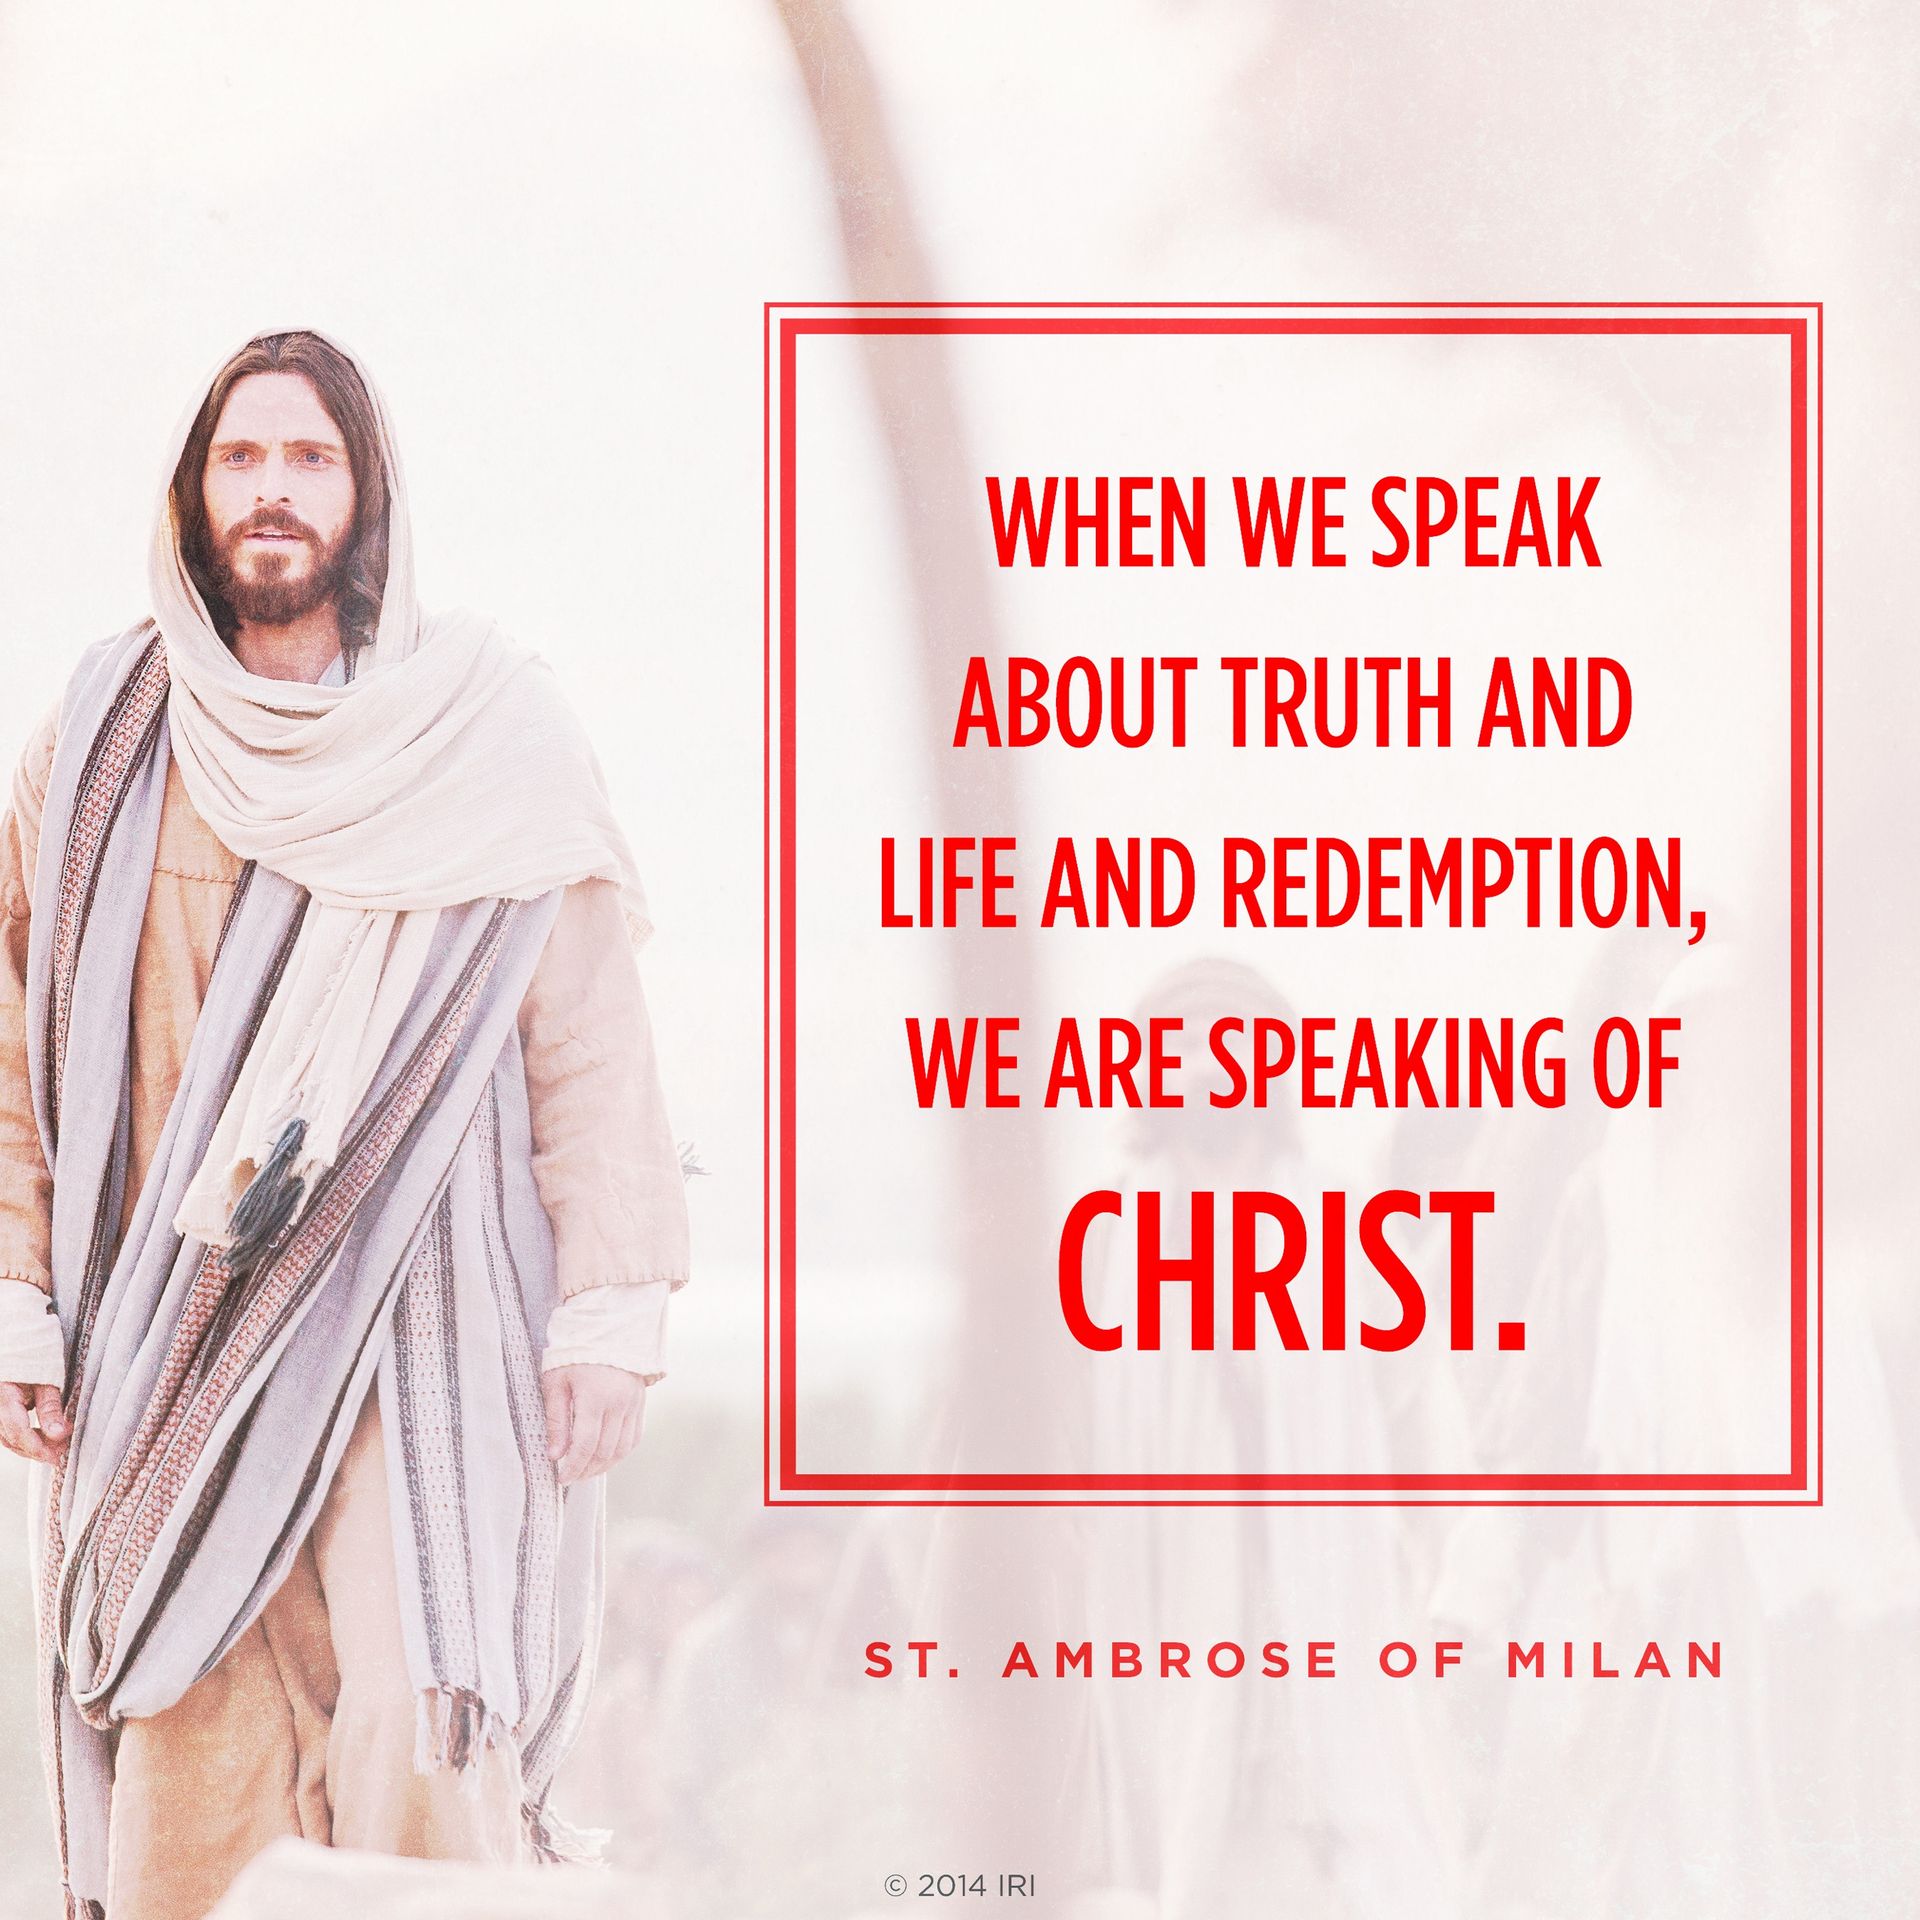 “When we speak about truth and life and redemption, we are speaking of Christ.”—St. Ambrose of Milan